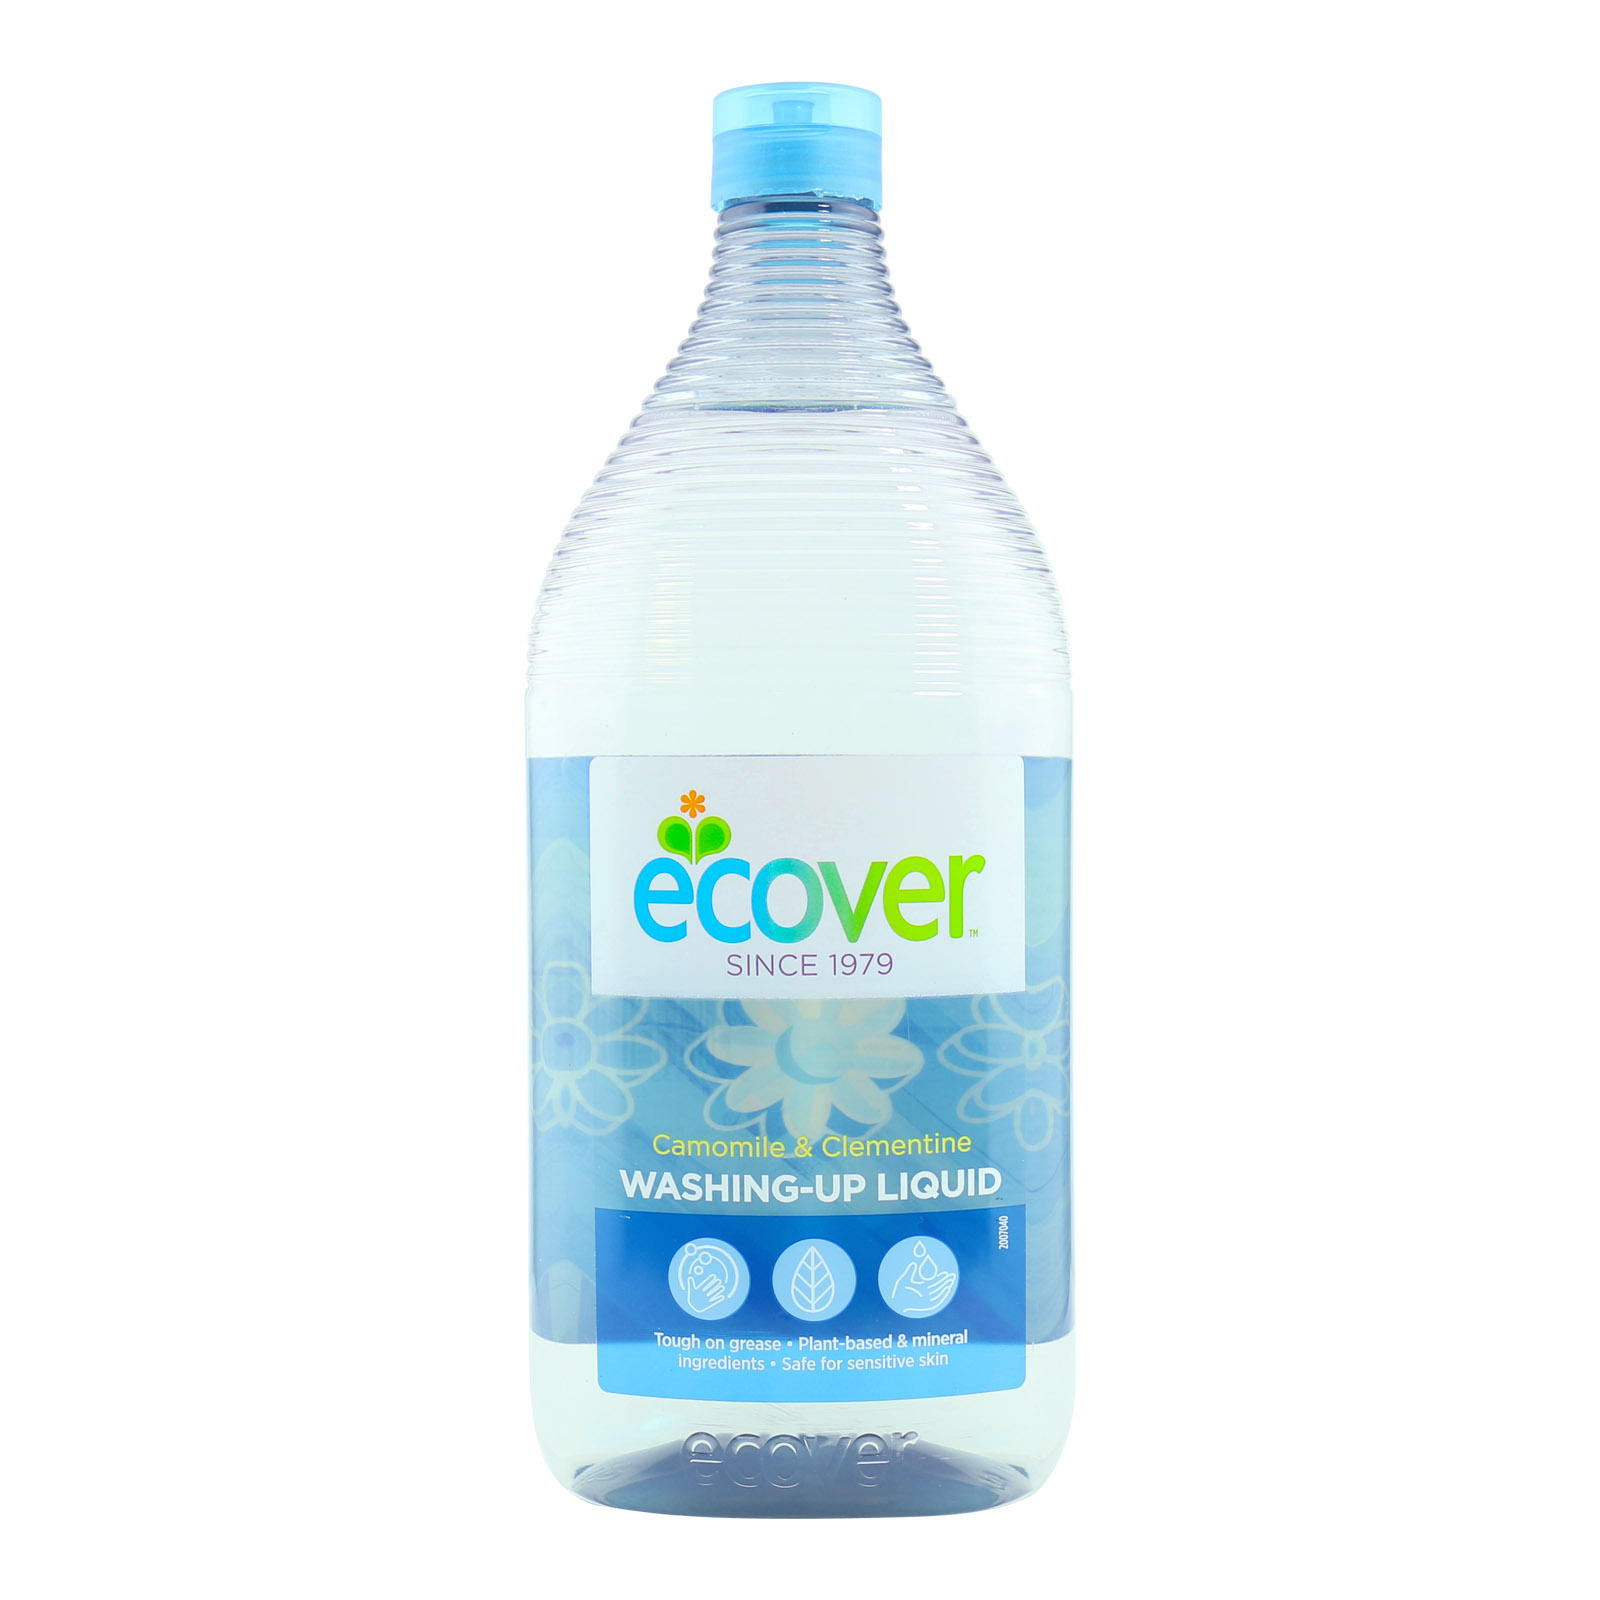 Ecover Washing-Up Liquid - Camomile & Clementine (950ml)